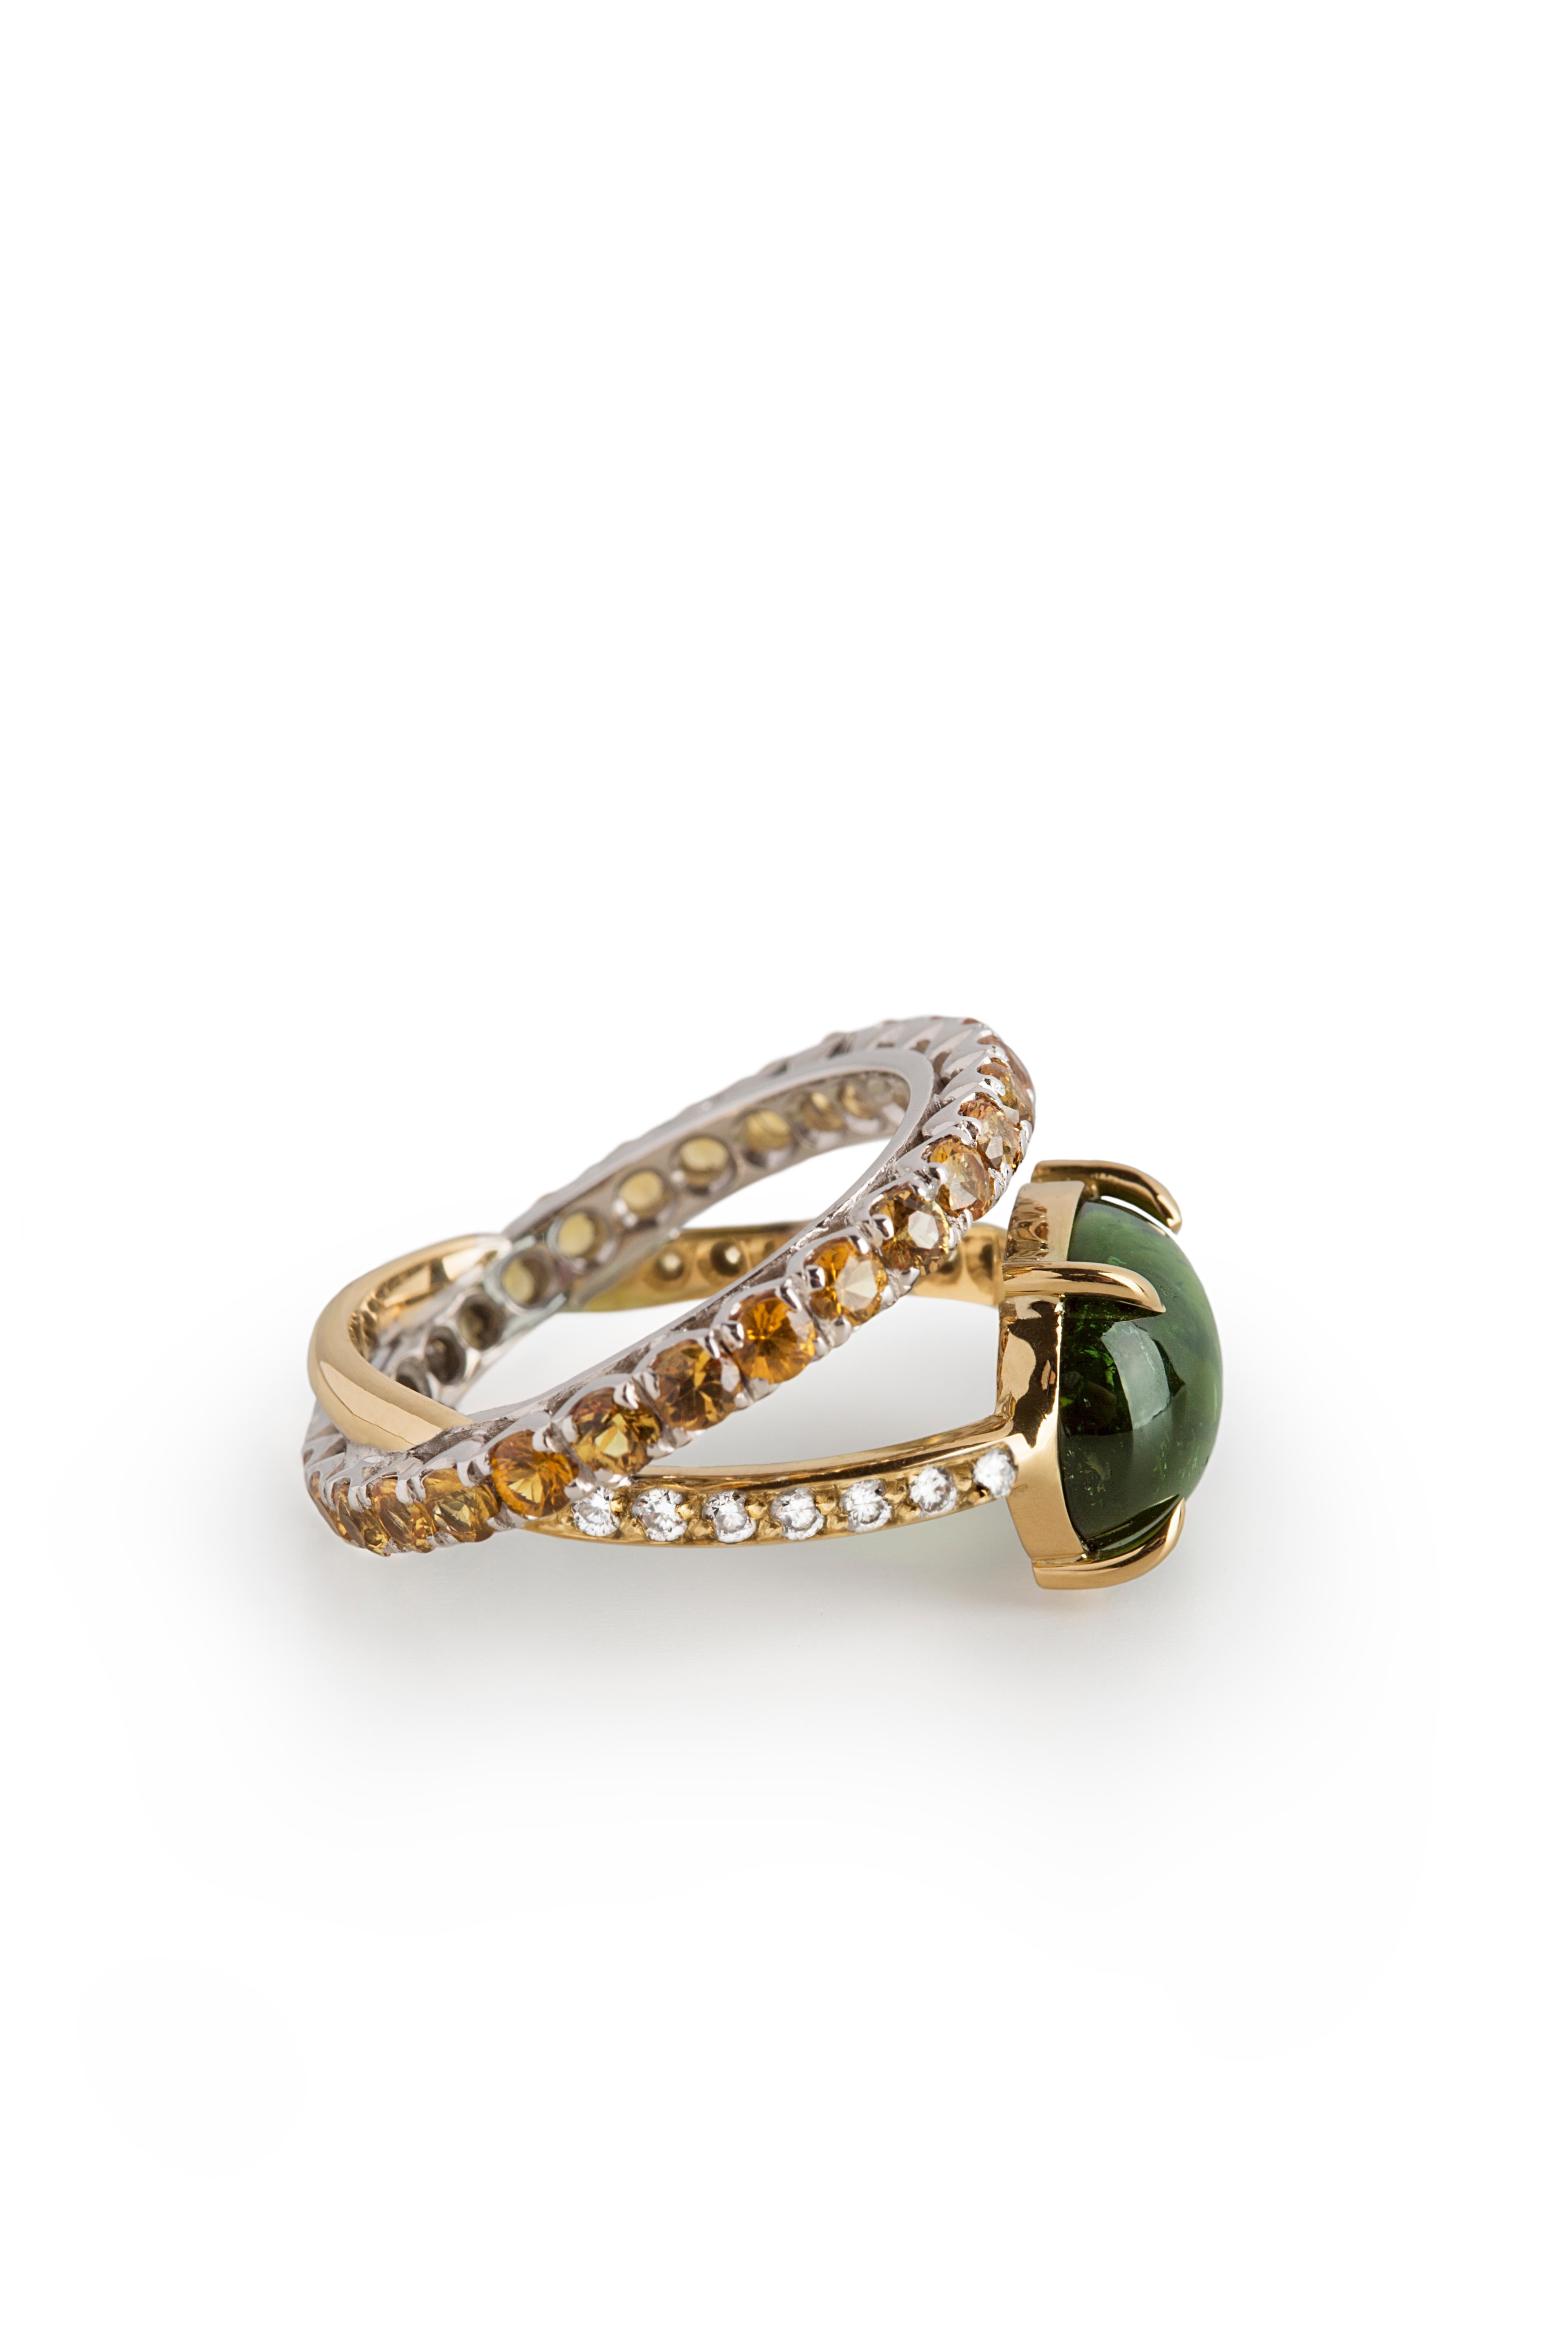 Rossella Ugolini Design Collection, Modern 18 K Gold Green Tourmaline 0.10 Karat White Diamonds Orange Mandarine Sapphires Ring.
This deep green aura ring is totally handcrafted in 18 karats Yellow and white gold, adorned with a 4.26 Karat Green